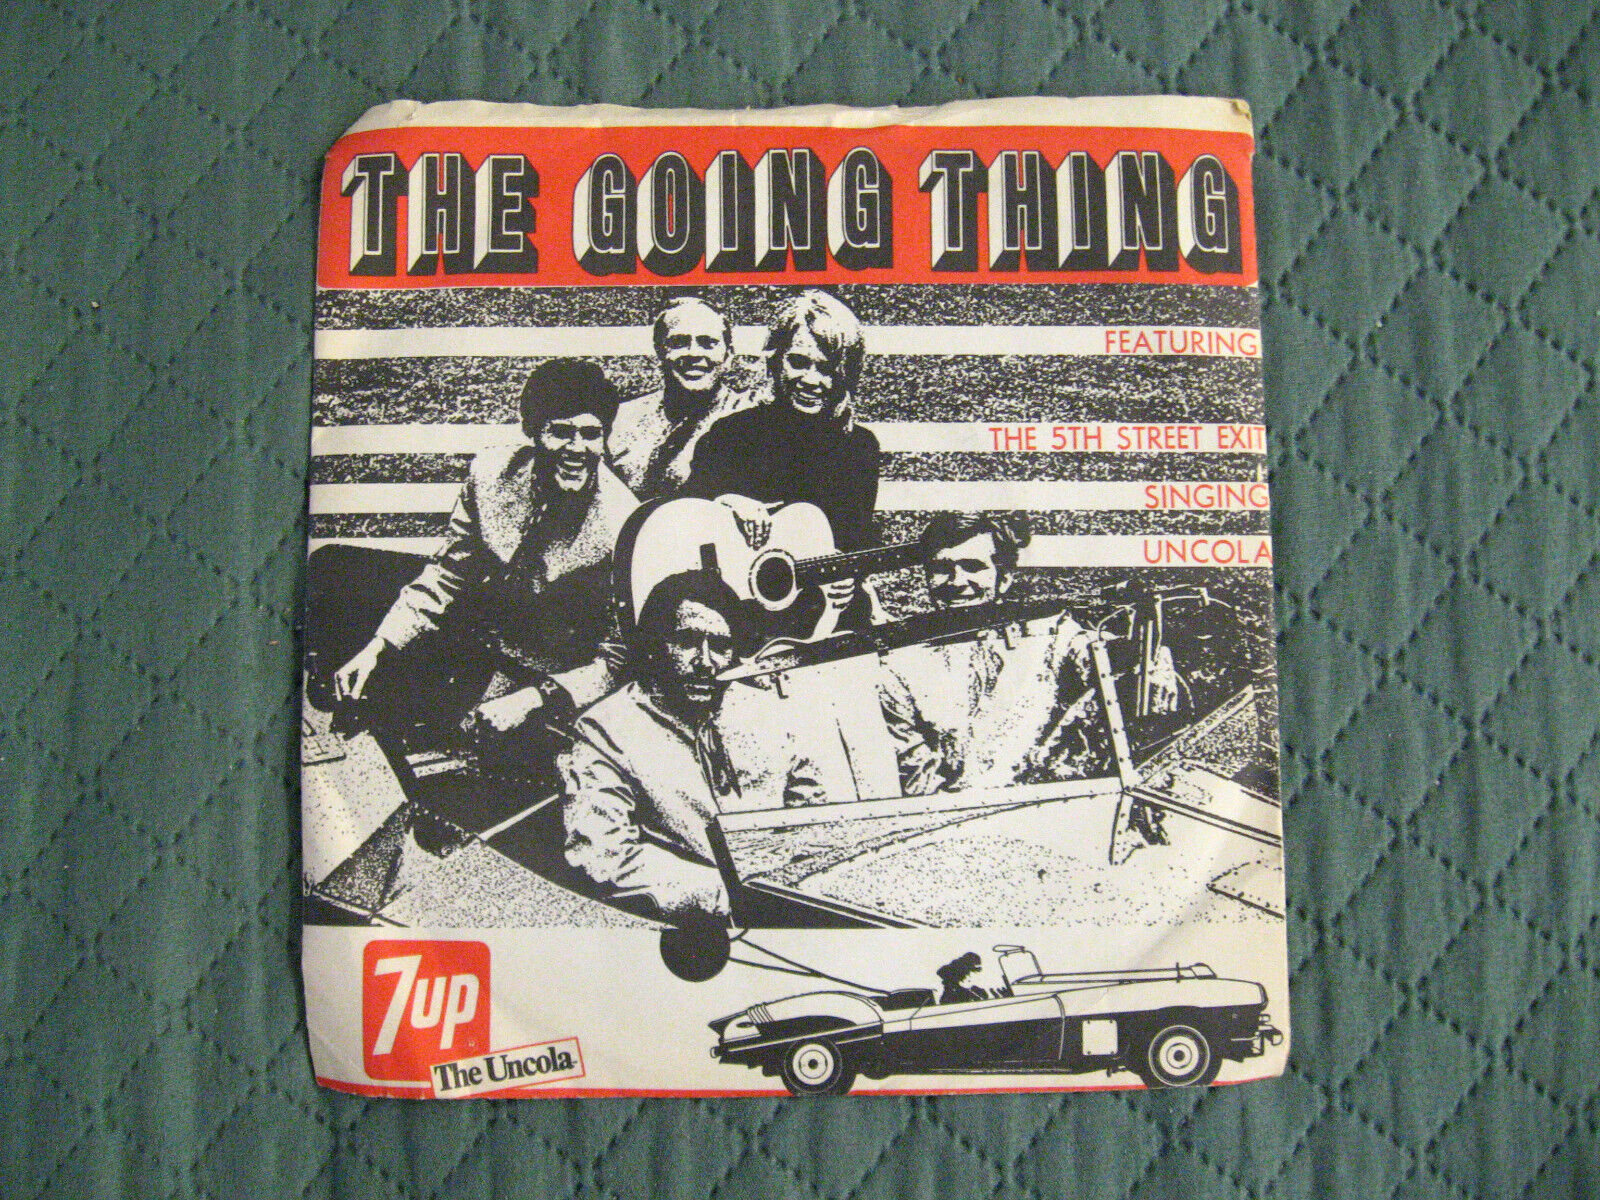 7up Uncola Song Macy\'s 1966 Record 45RPM - Vintage Fifth St Exit Holly Penfield